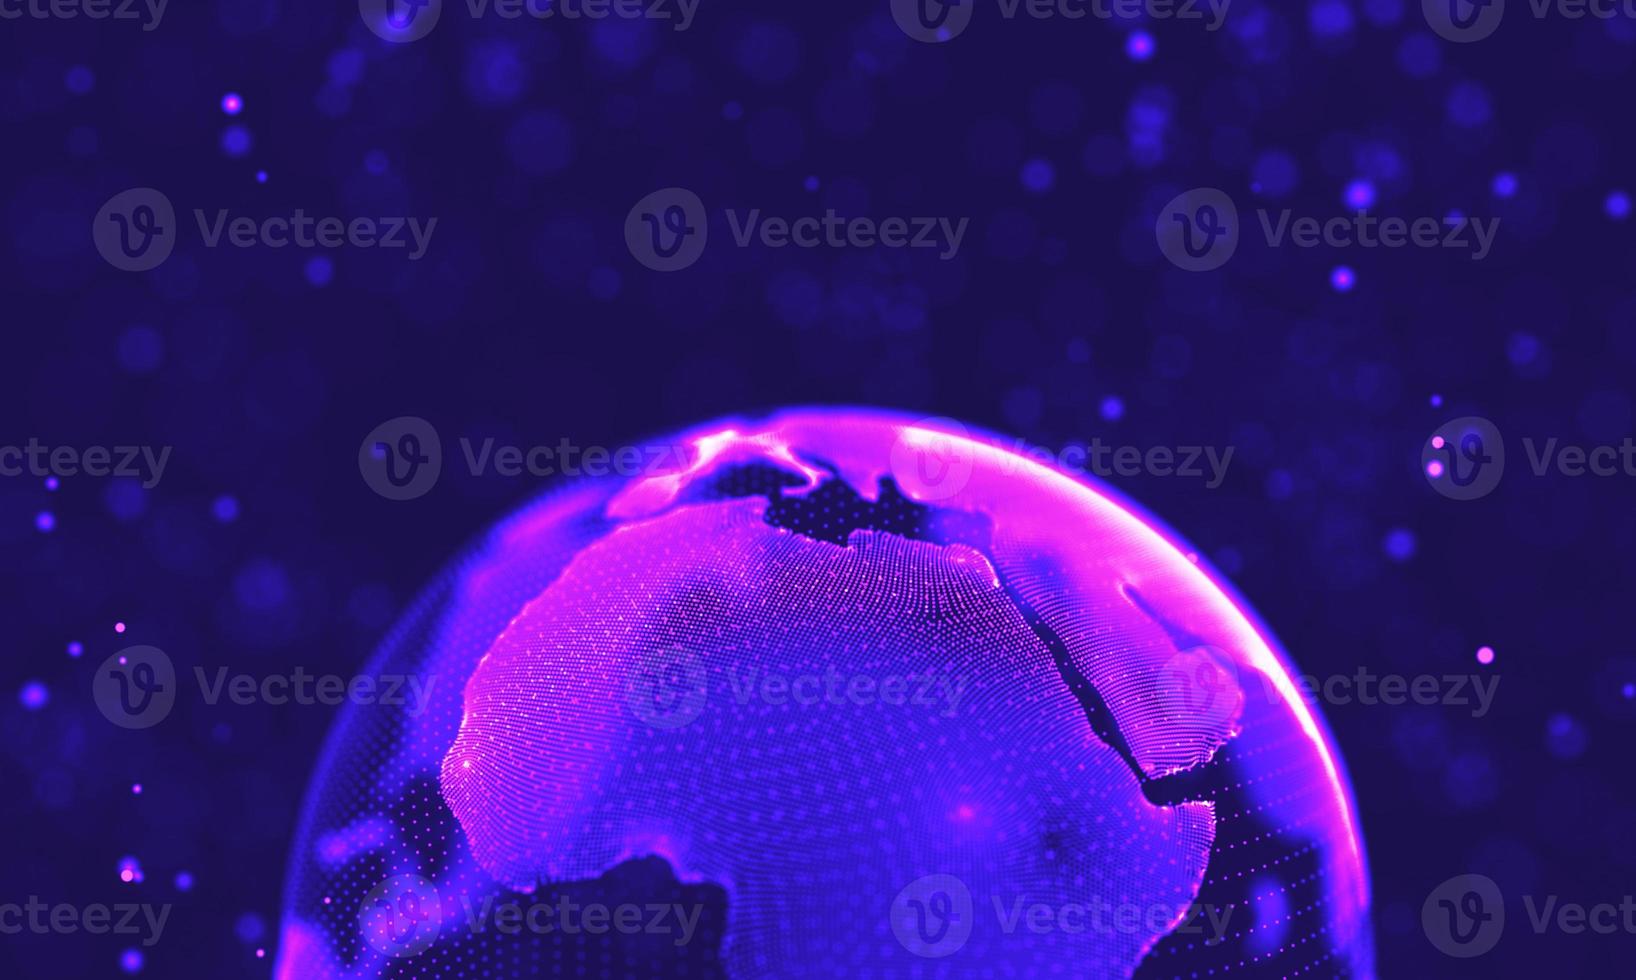 Ultra violet galaxy background. Space background illustration universe with Nebula. 2018 Purple technology background. Artificial intelligence concept photo